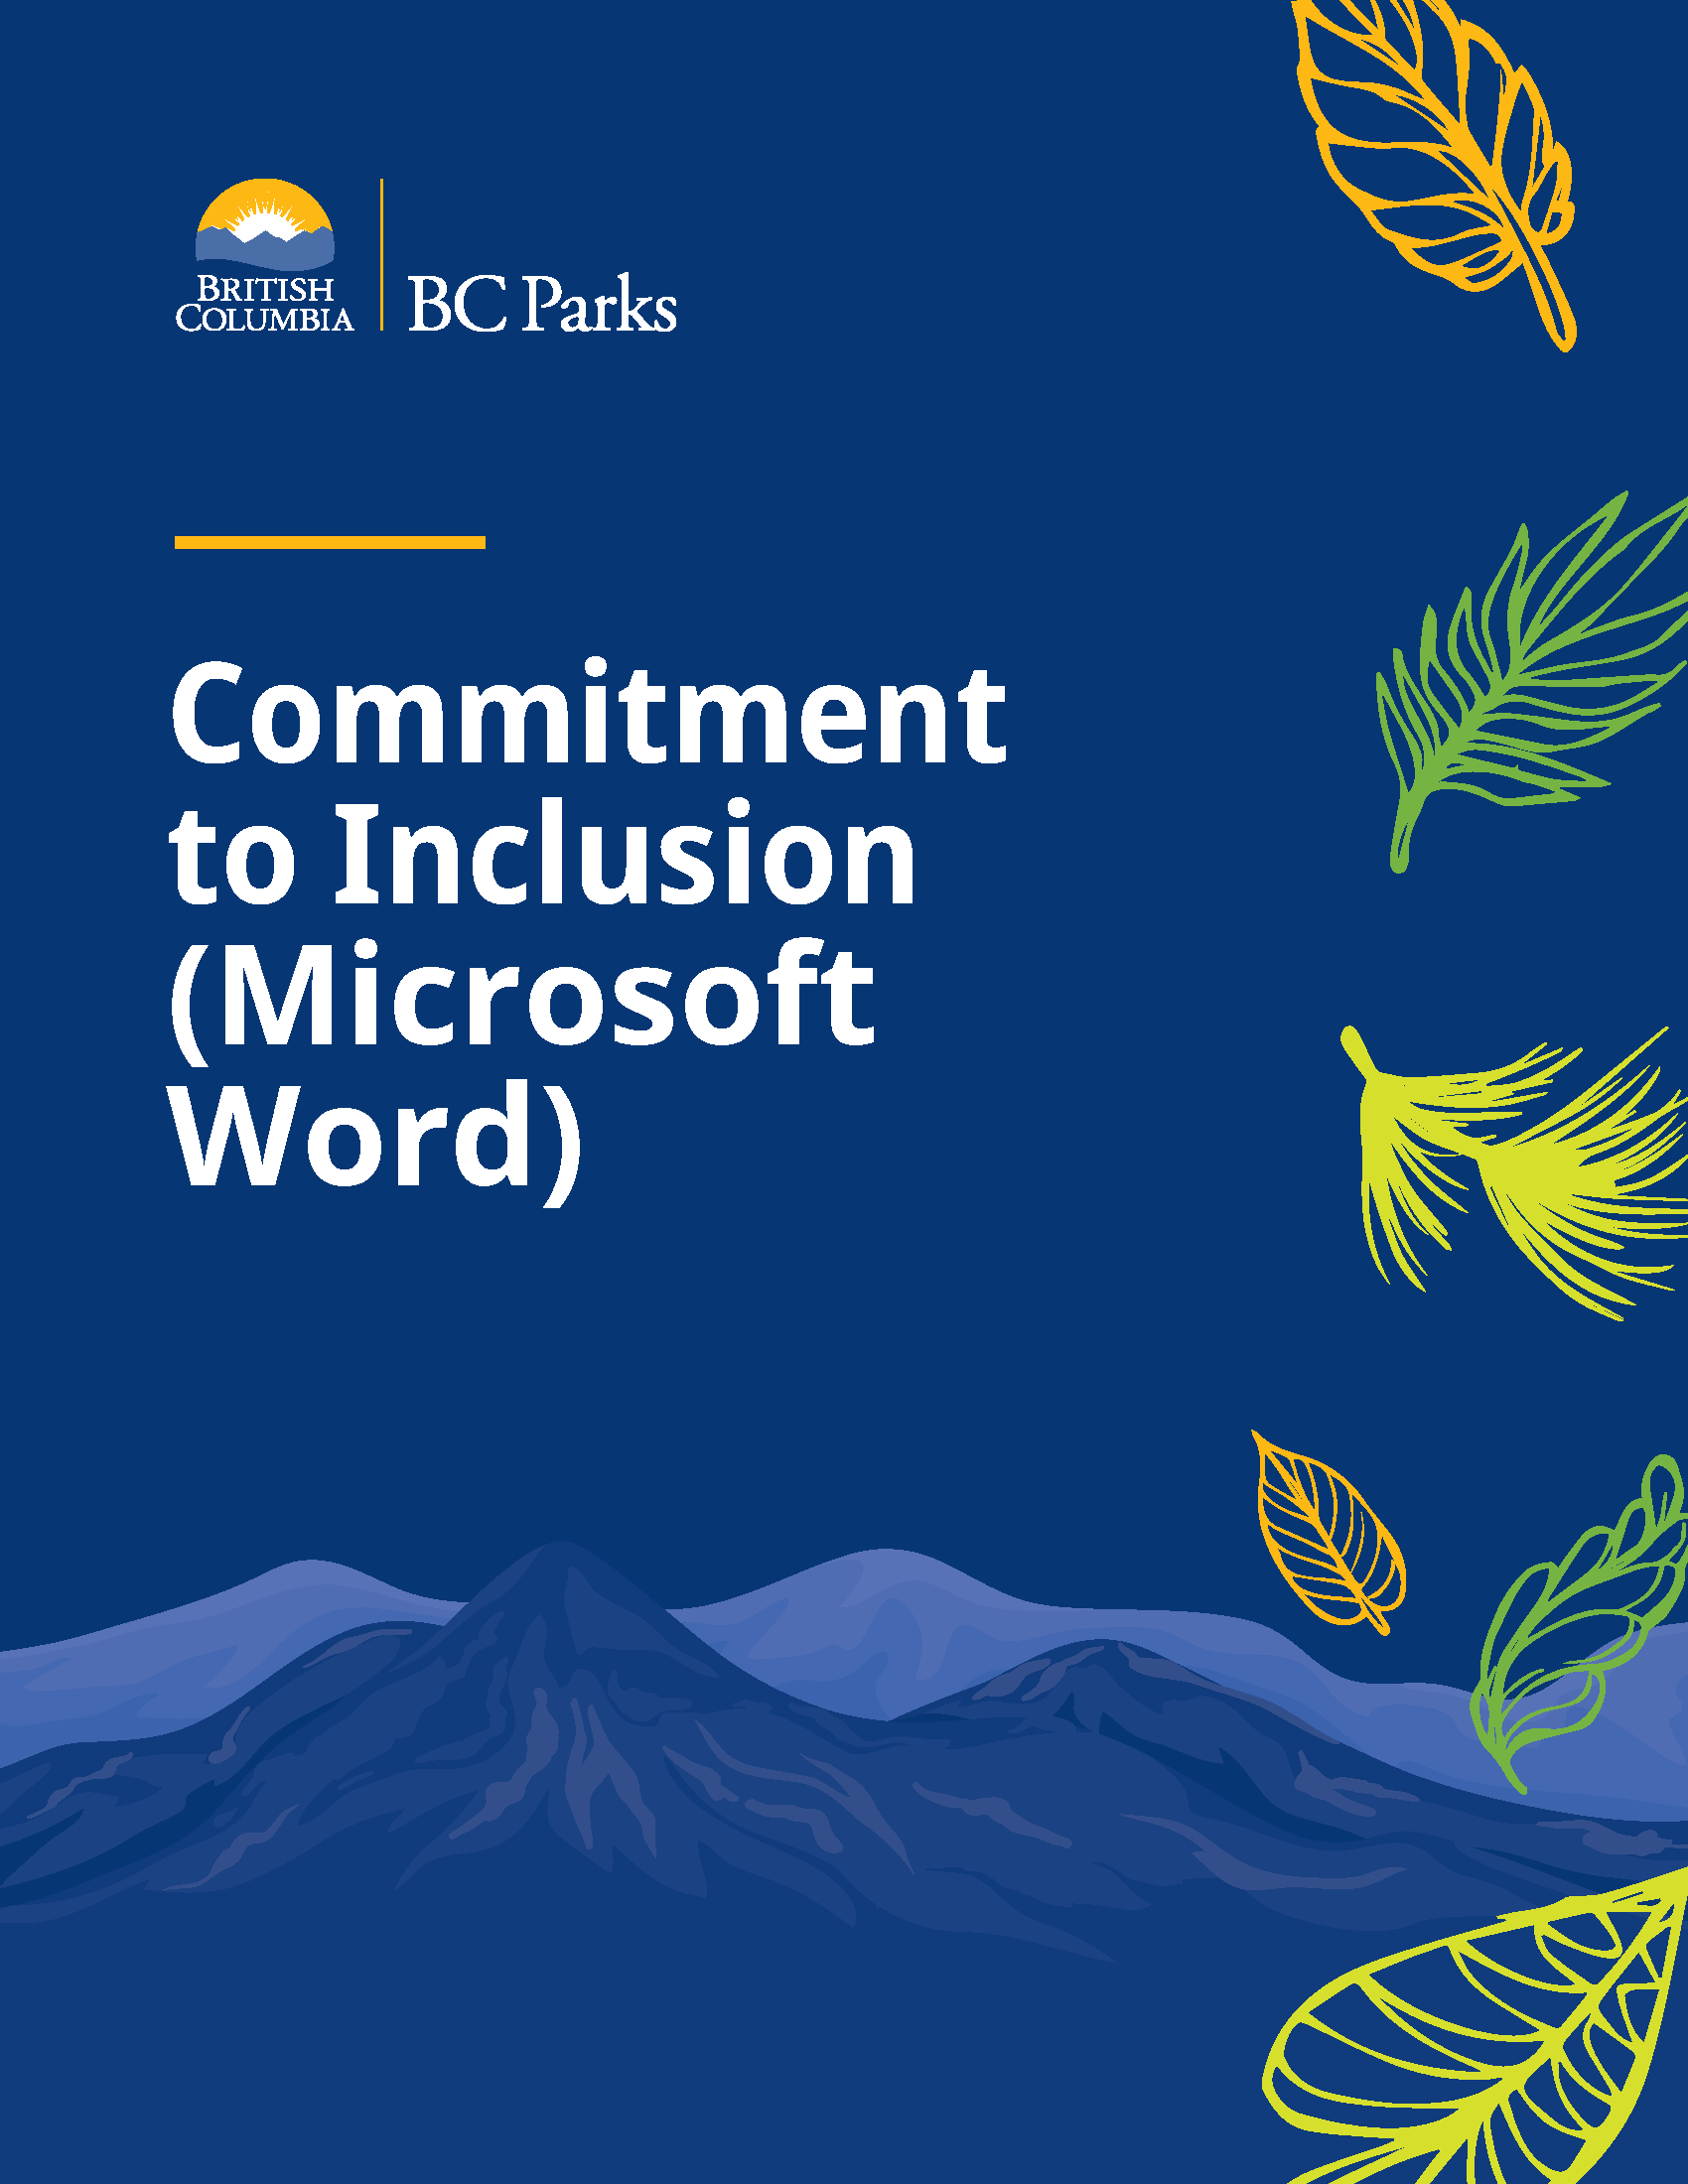 BC Parks Commitment to Inclusion Word document in English